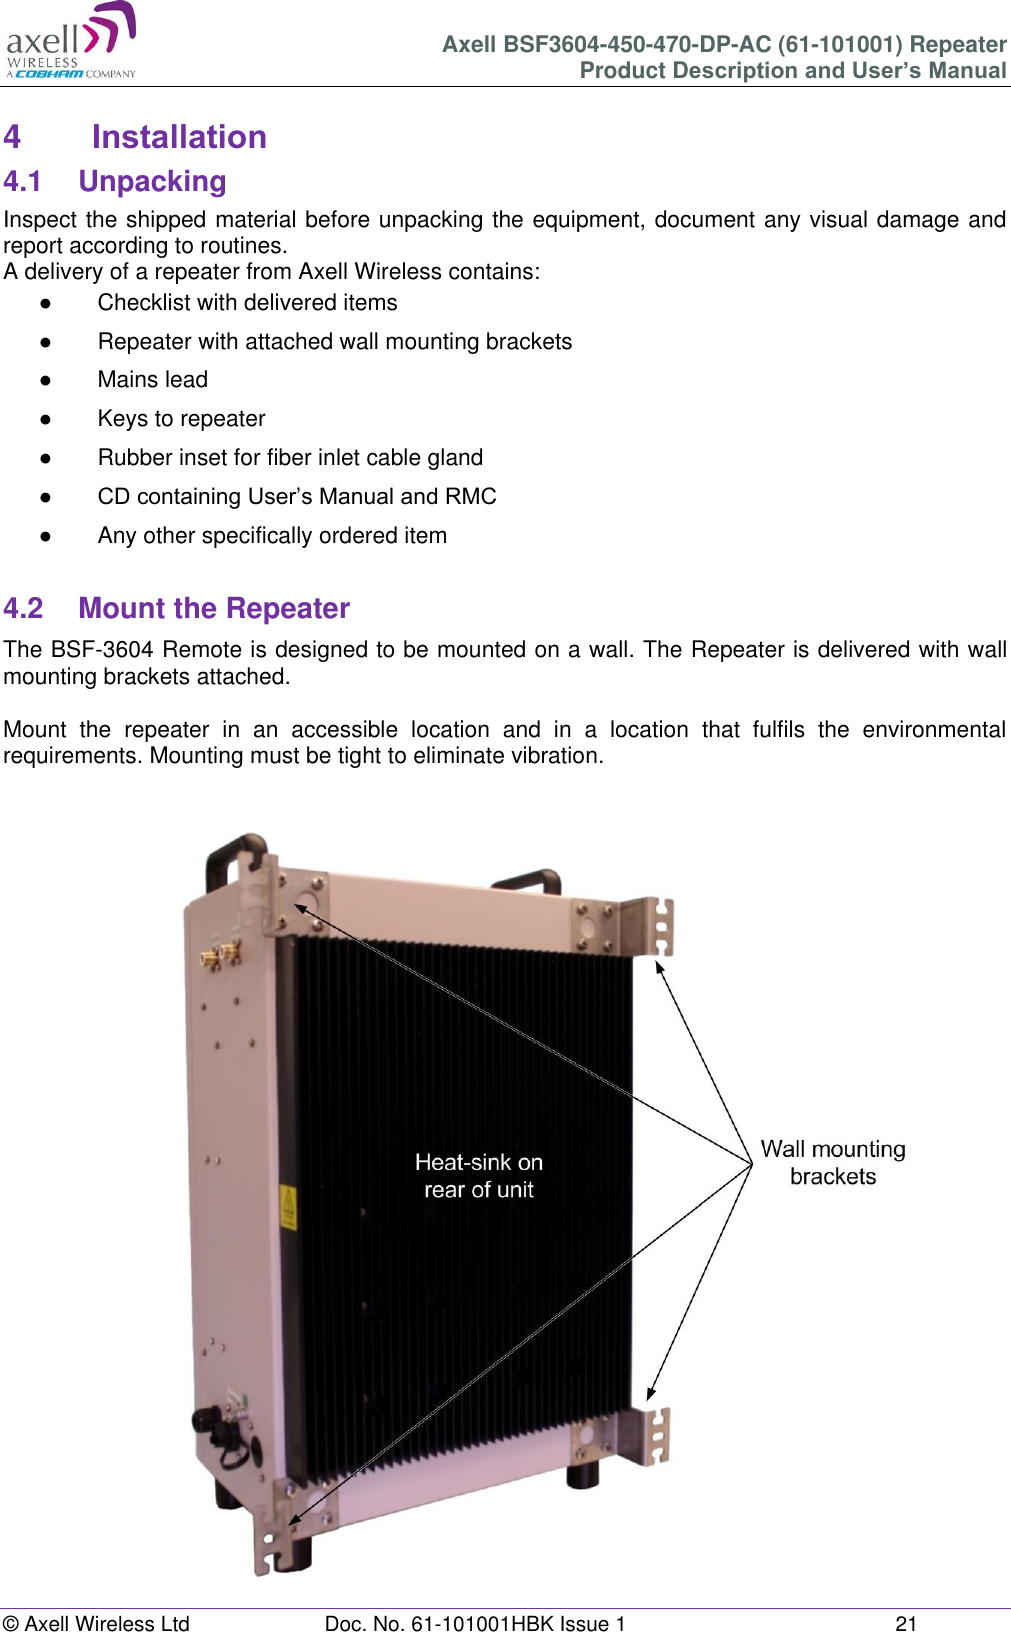 Axell BSF3604-450-470-DP-AC (61-101001) Repeater Product Description and User’s Manual © Axell Wireless Ltd  Doc. No. 61-101001HBK Issue 1  21   4  Installation 4.1  Unpacking Inspect the shipped material before unpacking the equipment, document any visual damage and report according to routines. A delivery of a repeater from Axell Wireless contains: ● Checklist with delivered items ●  Repeater with attached wall mounting brackets ●  Mains lead ●  Keys to repeater  ●  Rubber inset for fiber inlet cable gland ● CD containing User’s Manual and RMC ●  Any other specifically ordered item  4.2  Mount the Repeater The BSF-3604 Remote is designed to be mounted on a wall. The Repeater is delivered with wall mounting brackets attached.   Mount  the  repeater  in  an  accessible  location  and  in  a  location  that  fulfils  the  environmental requirements. Mounting must be tight to eliminate vibration.     